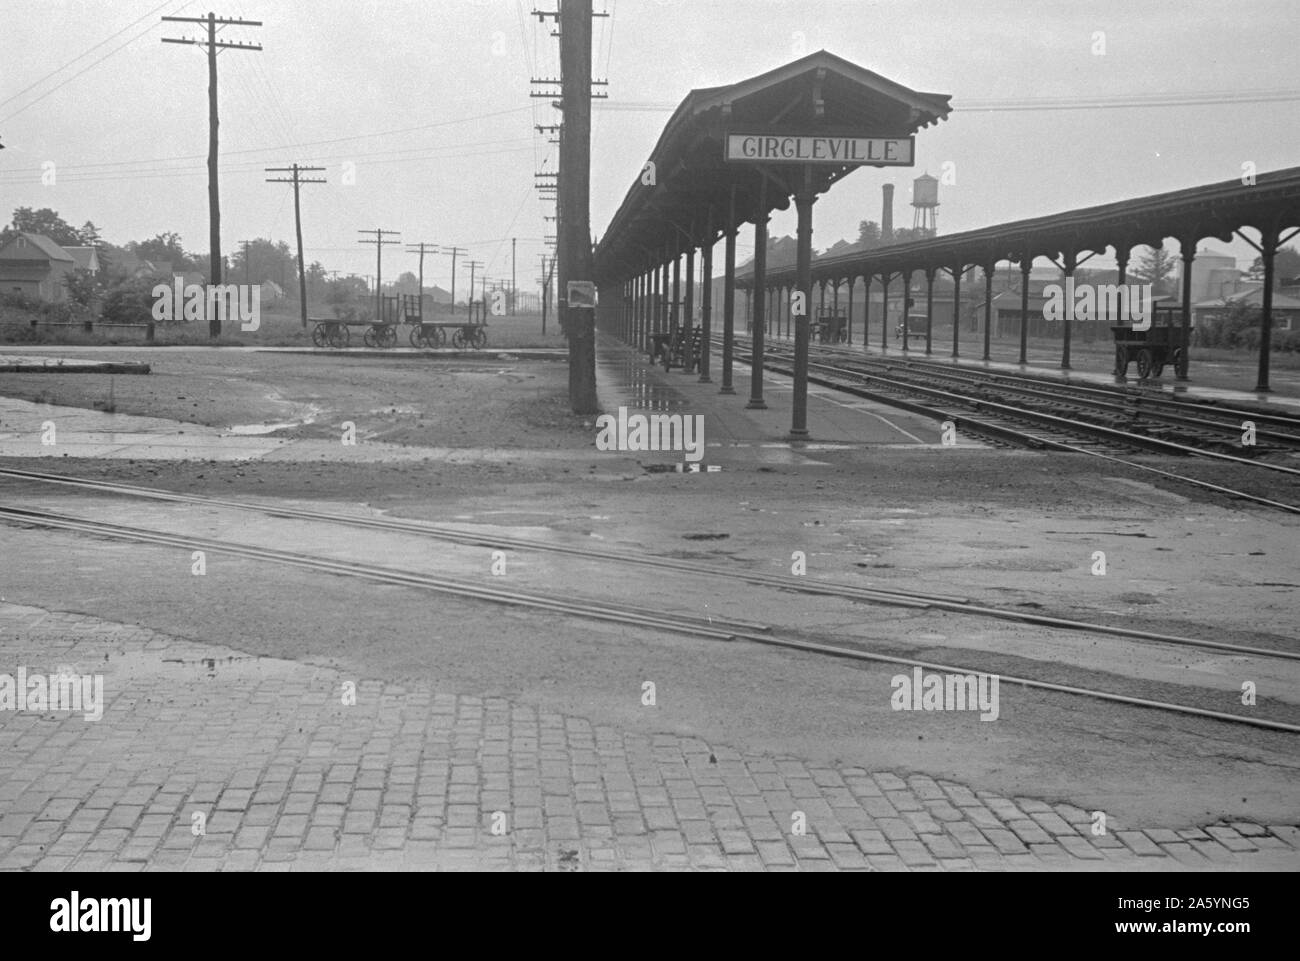 Railroad station of Circleville, Ohio. Showing deserted platforms during the American great depression 1938 Stock Photo